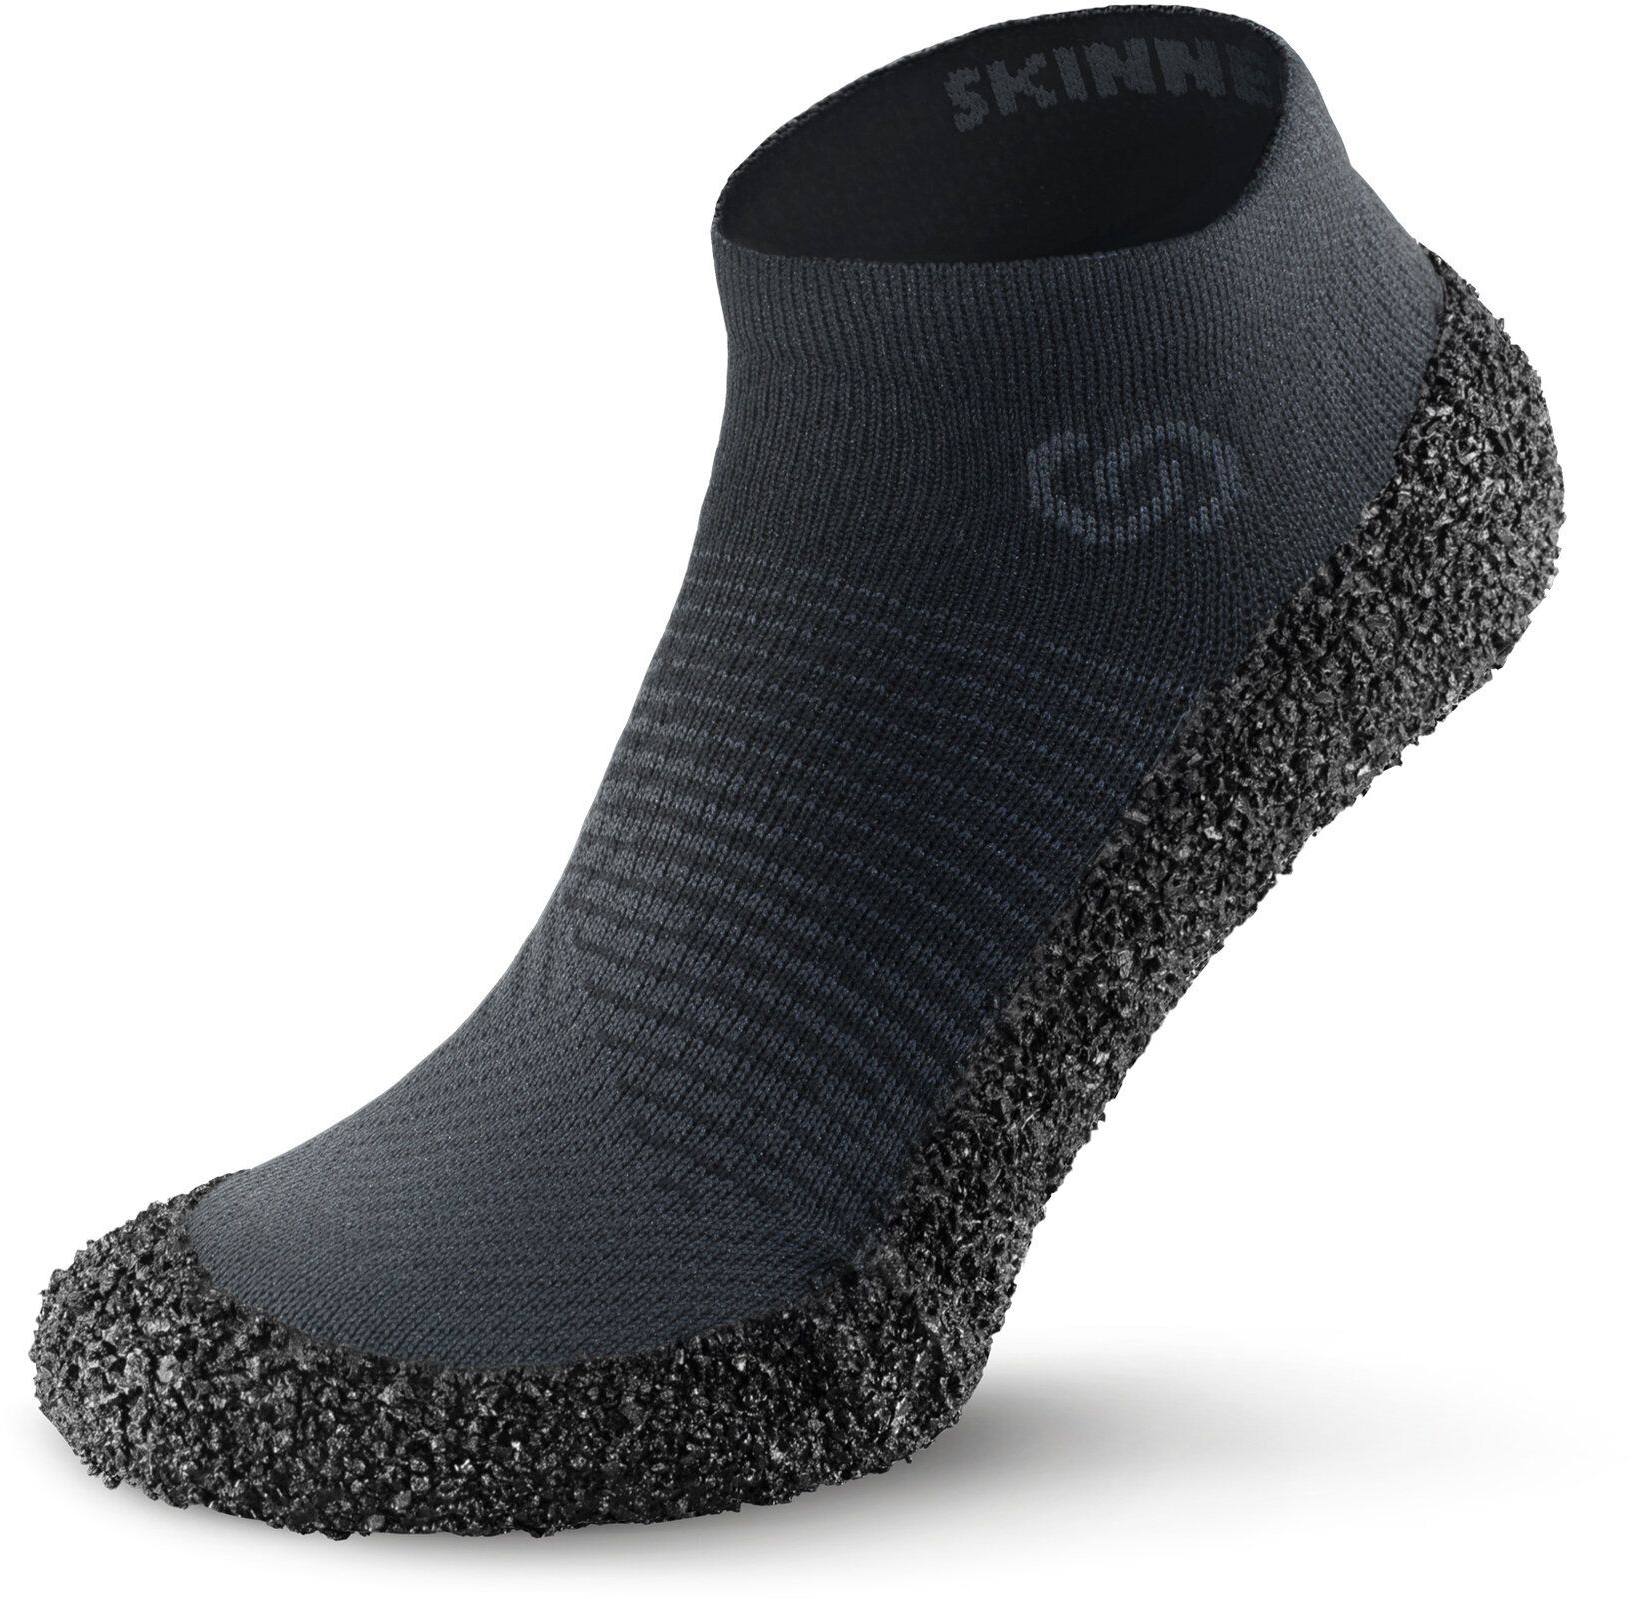 Skinners 2.0 Anthracite S